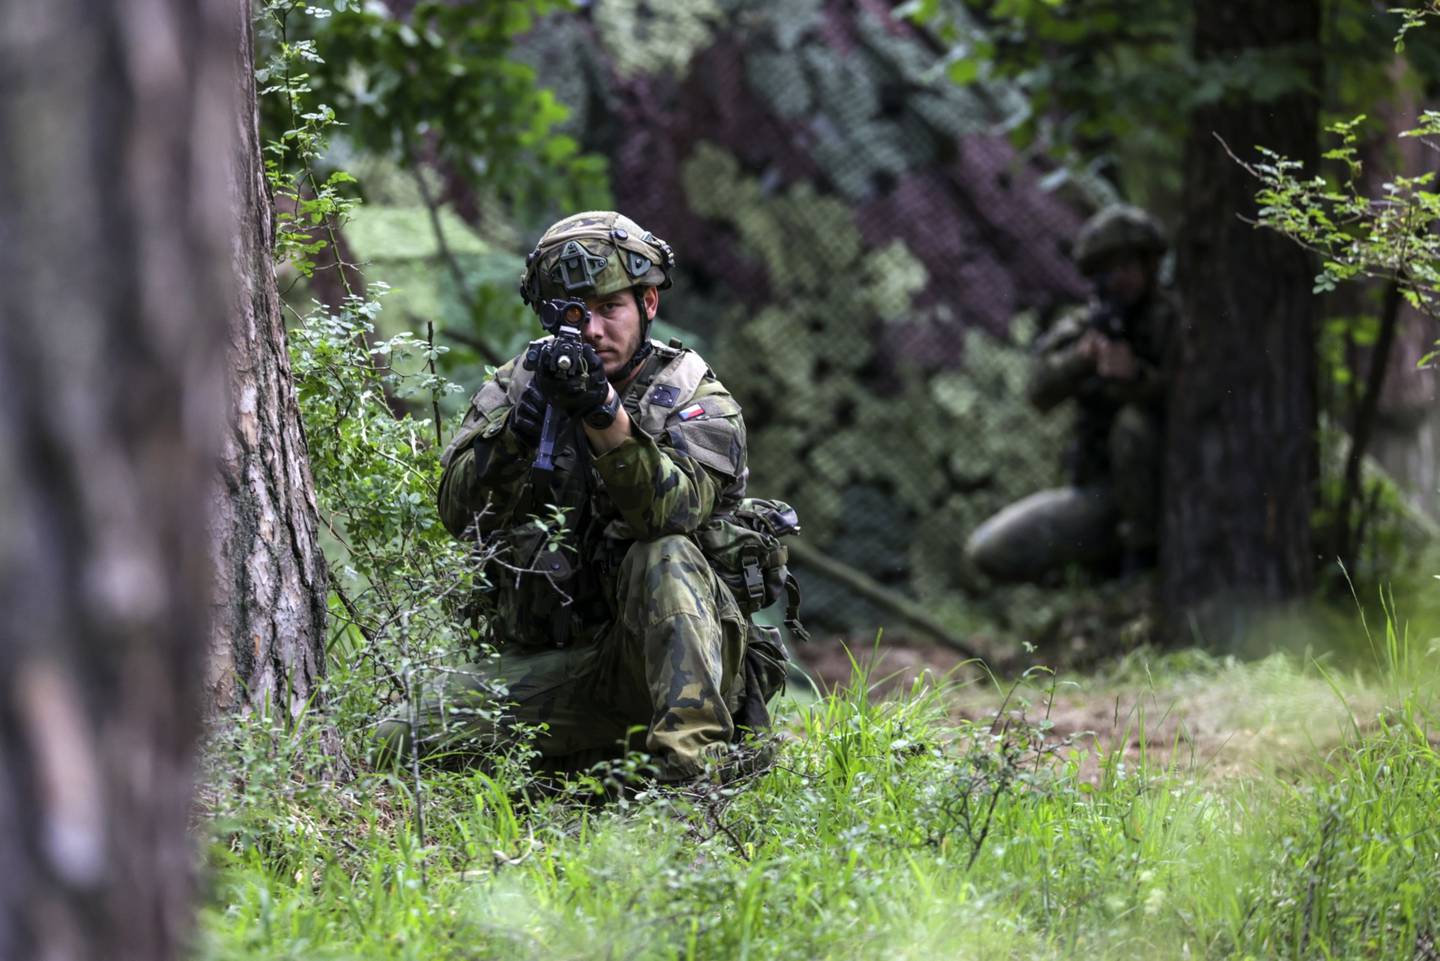 A Czech Army soldier during the Combined Resolve 17 multinational training exercise. Bloomberg